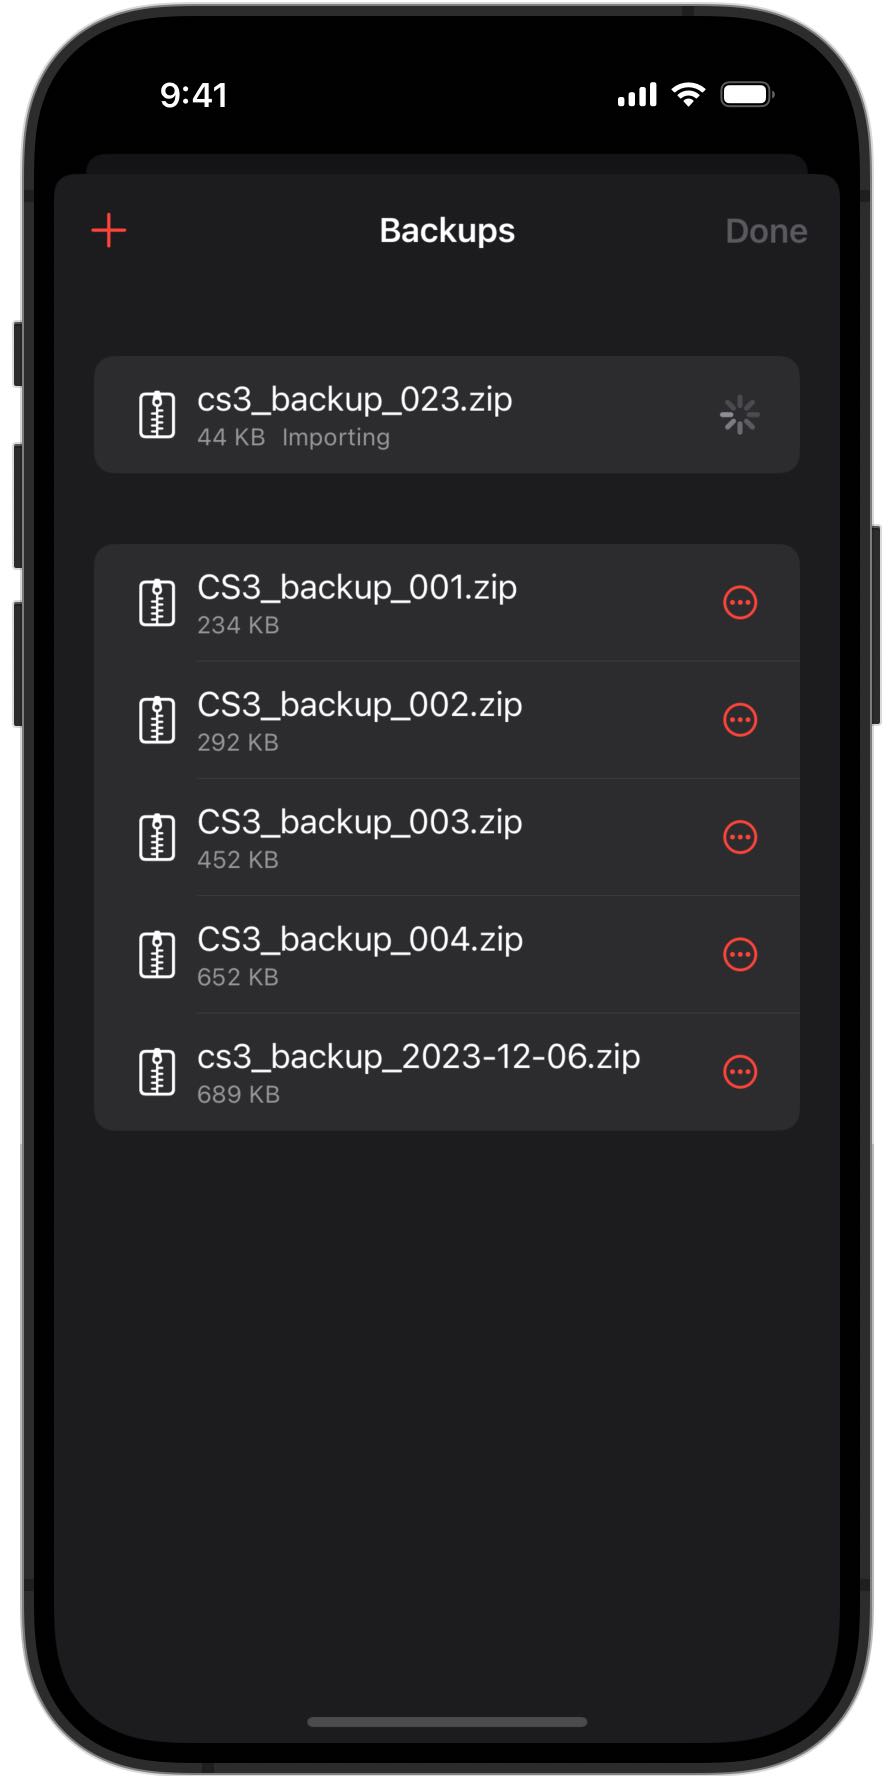 Screenshot of an iPhone importing a backup in RailControl Pro